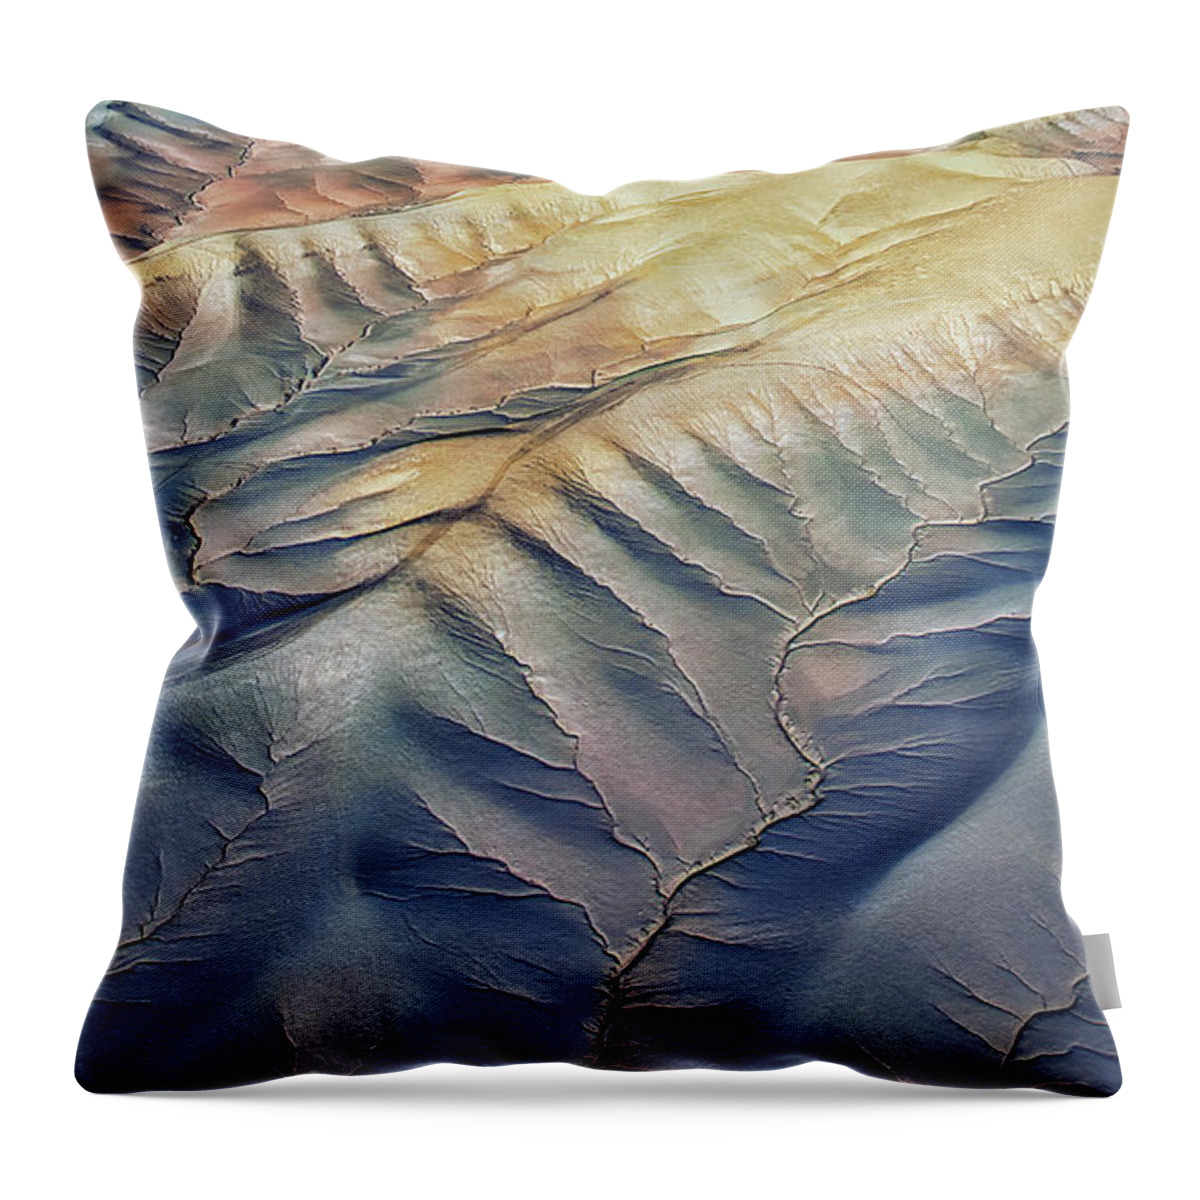 Utah Badlands Throw Pillow featuring the photograph Abstract Trees In the Utah Badlands by Susan Candelario